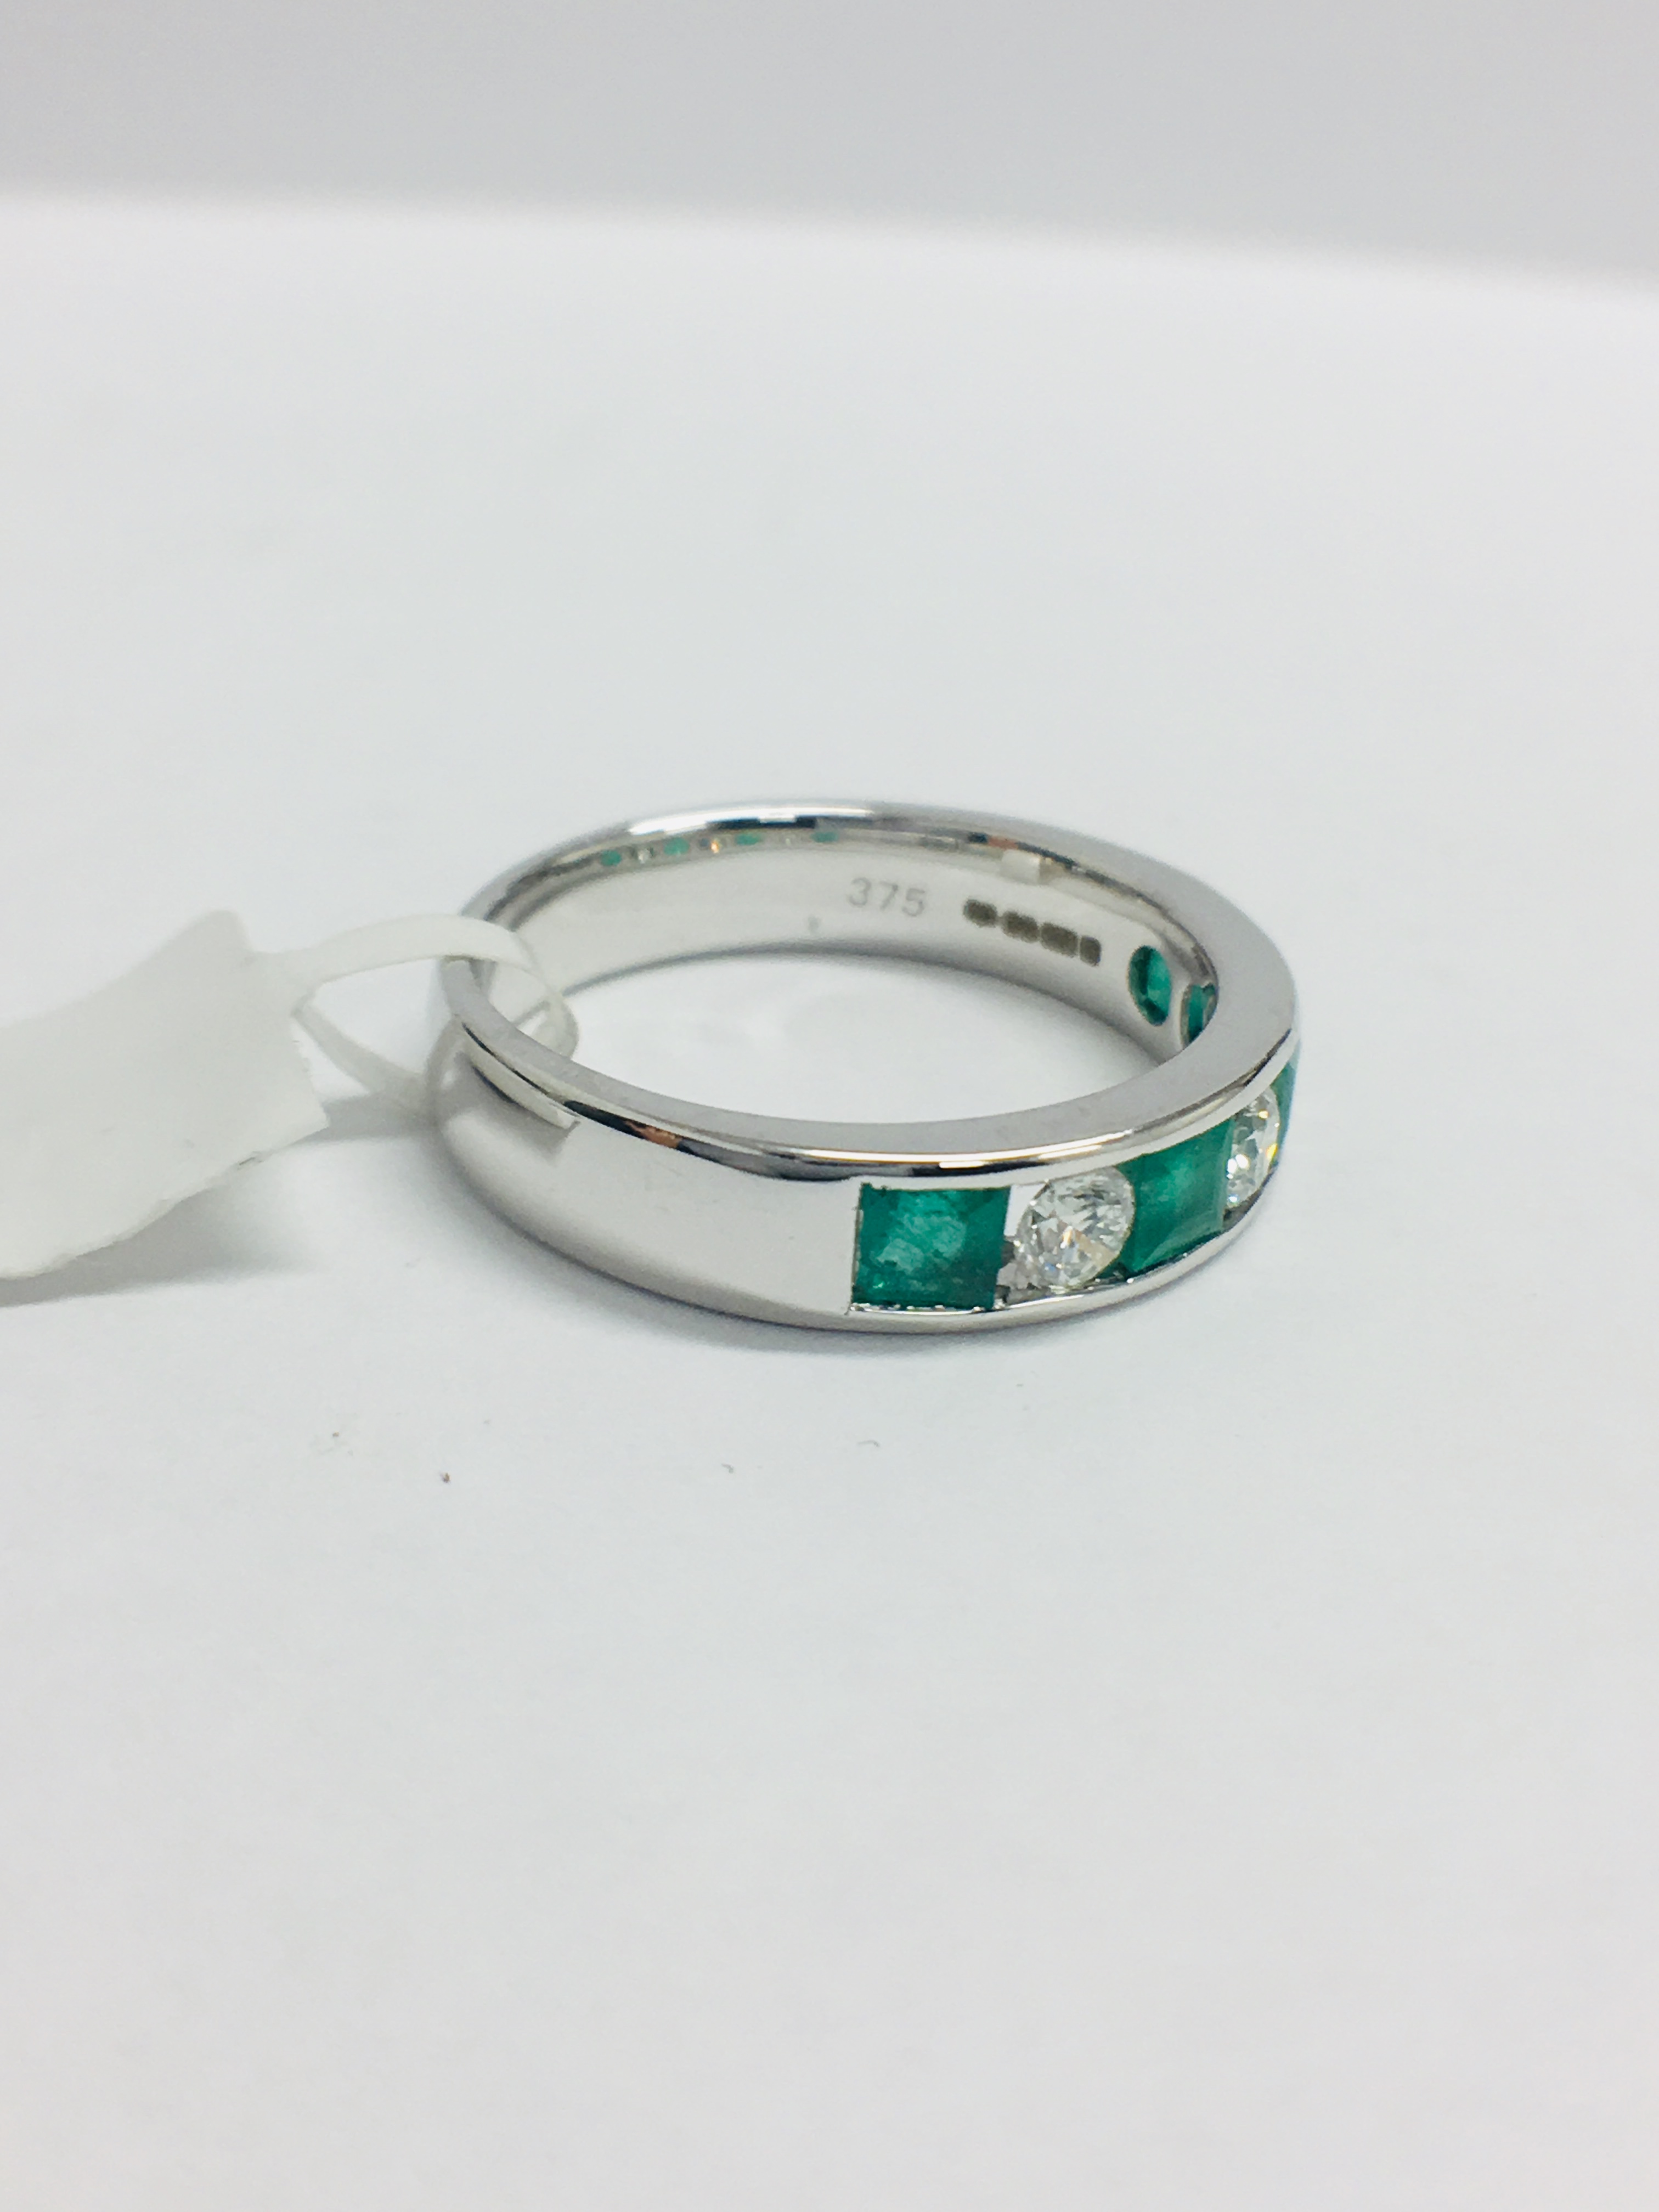 9Ct White Gold Emerald Diamond Channel Set Ring, - Image 9 of 13